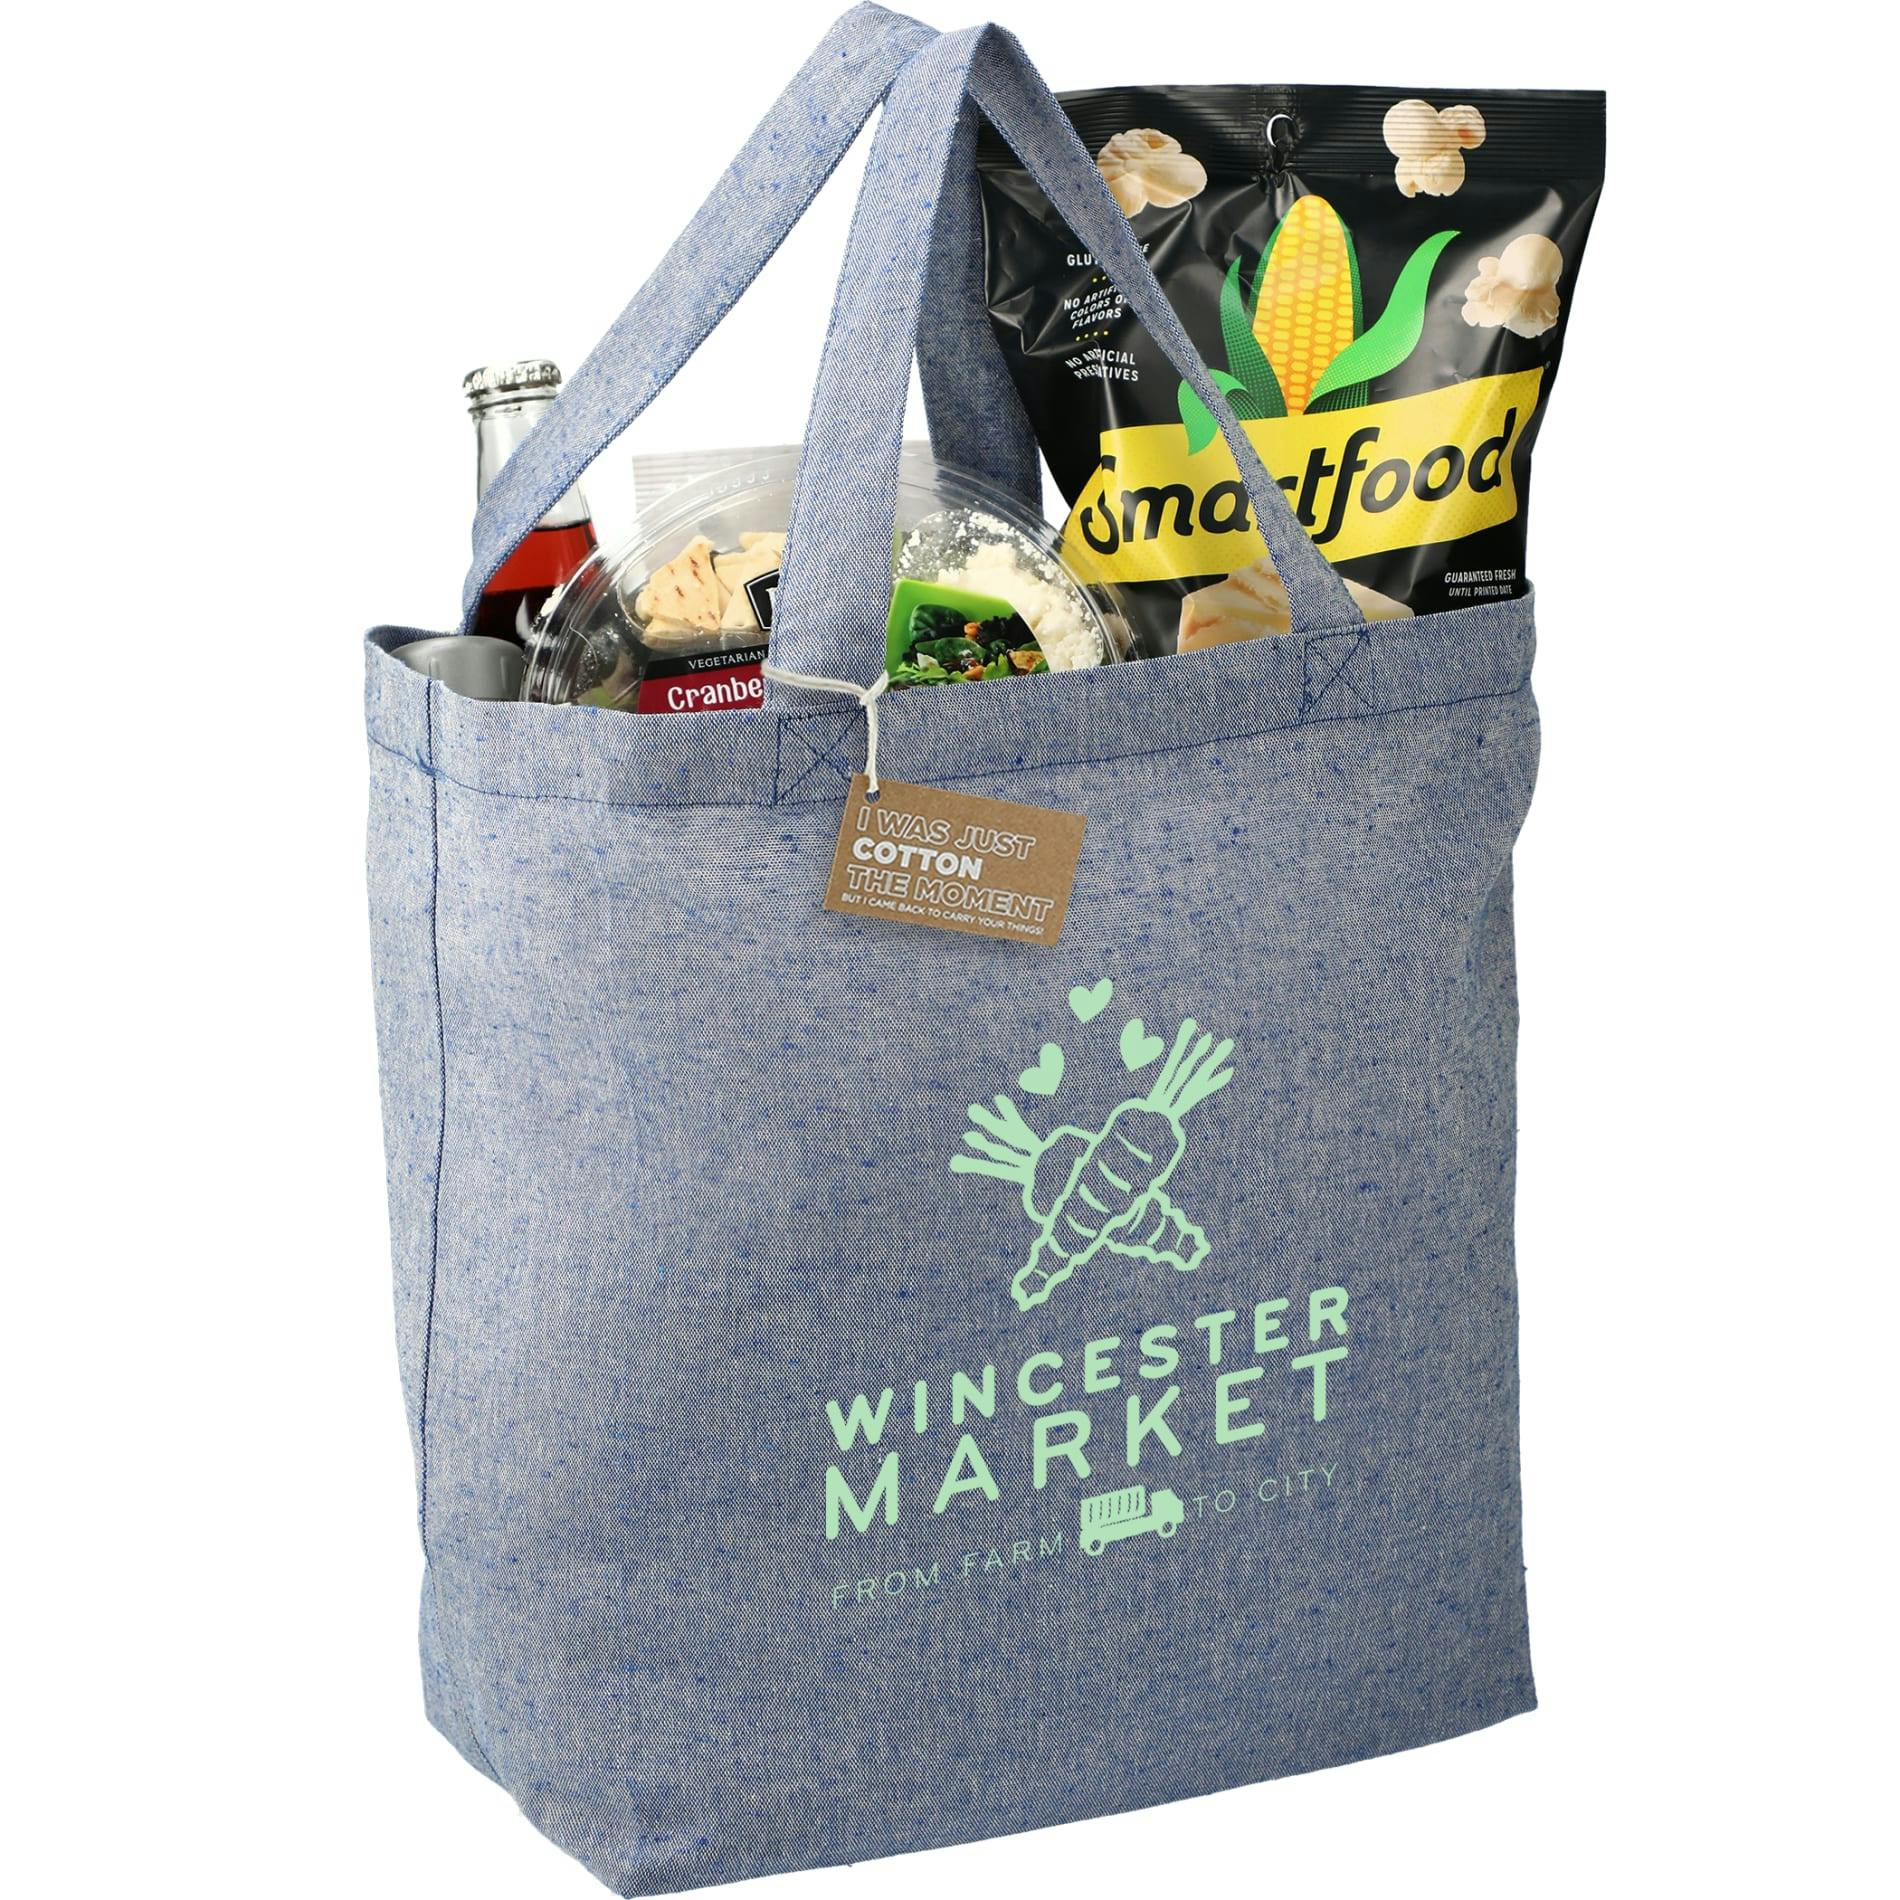 Recycled 5oz Cotton Twill Grocery Tote - additional Image 1